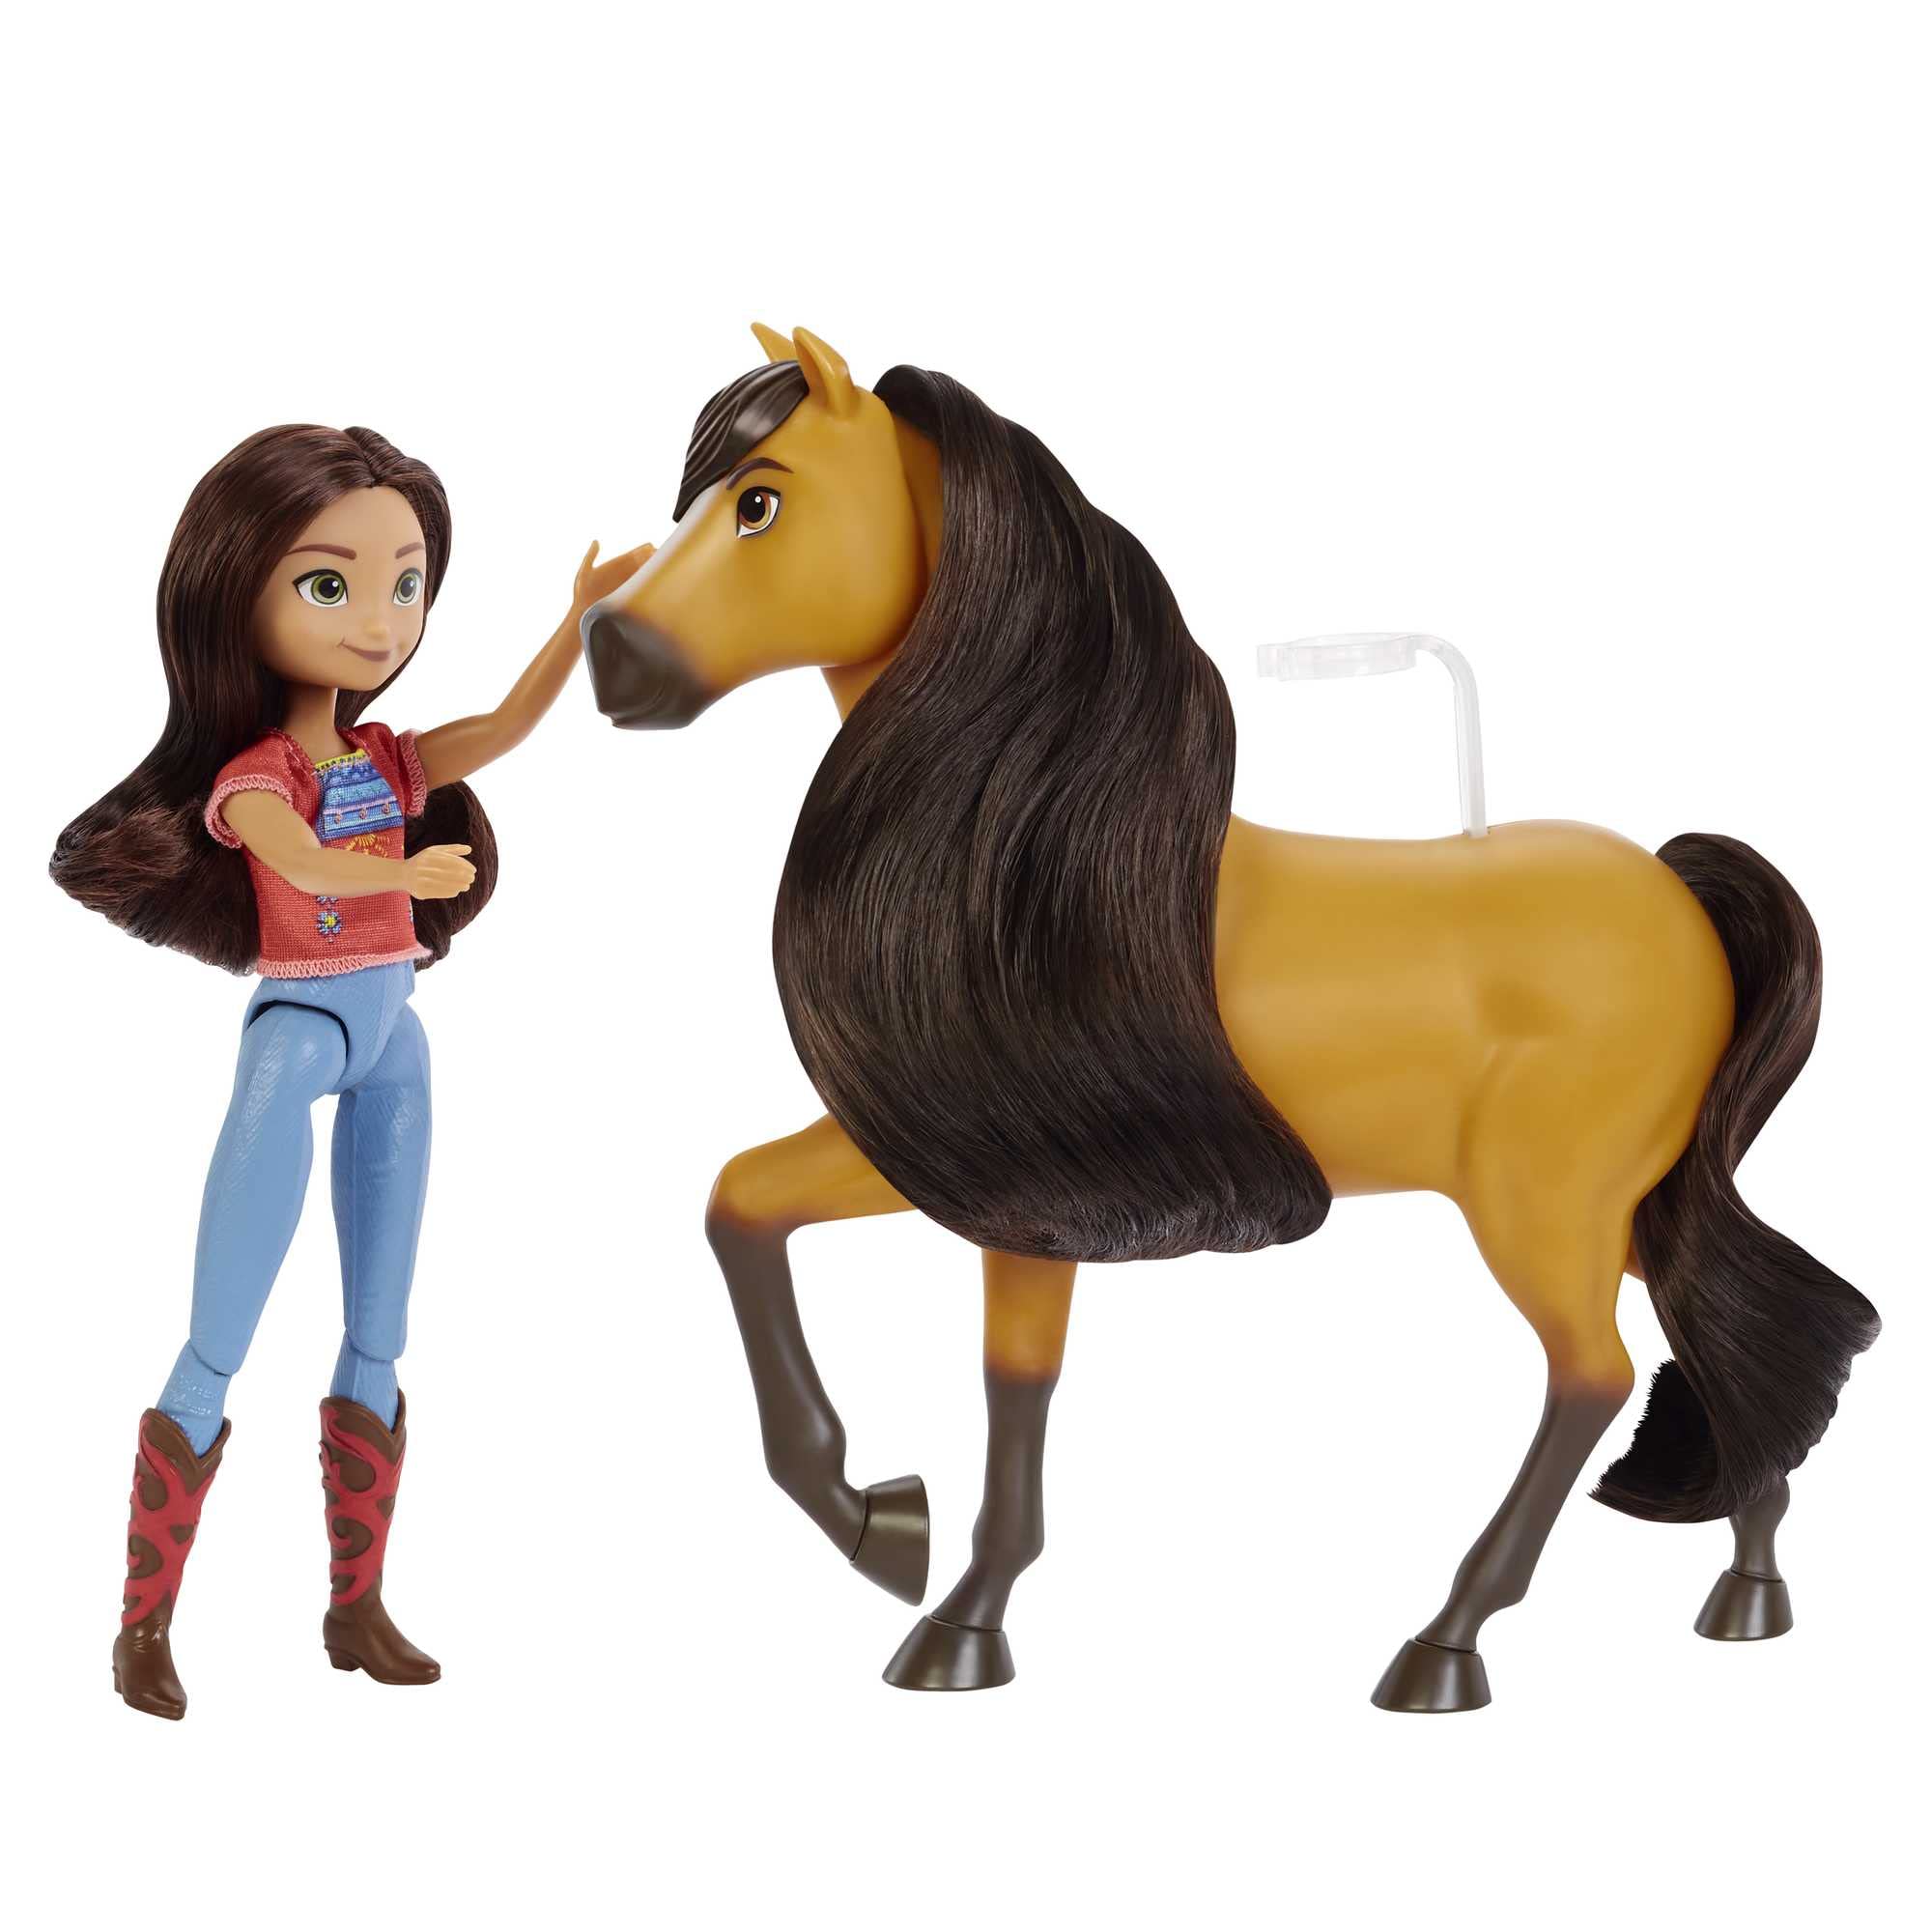 Spirit Lucky Doll & Horse - Doll with 7 Movable Joints & Horse with Soft Mane & Tail - Includes Treats & Brush - 7" Doll, 8" Horse - Gift for Kids 3+